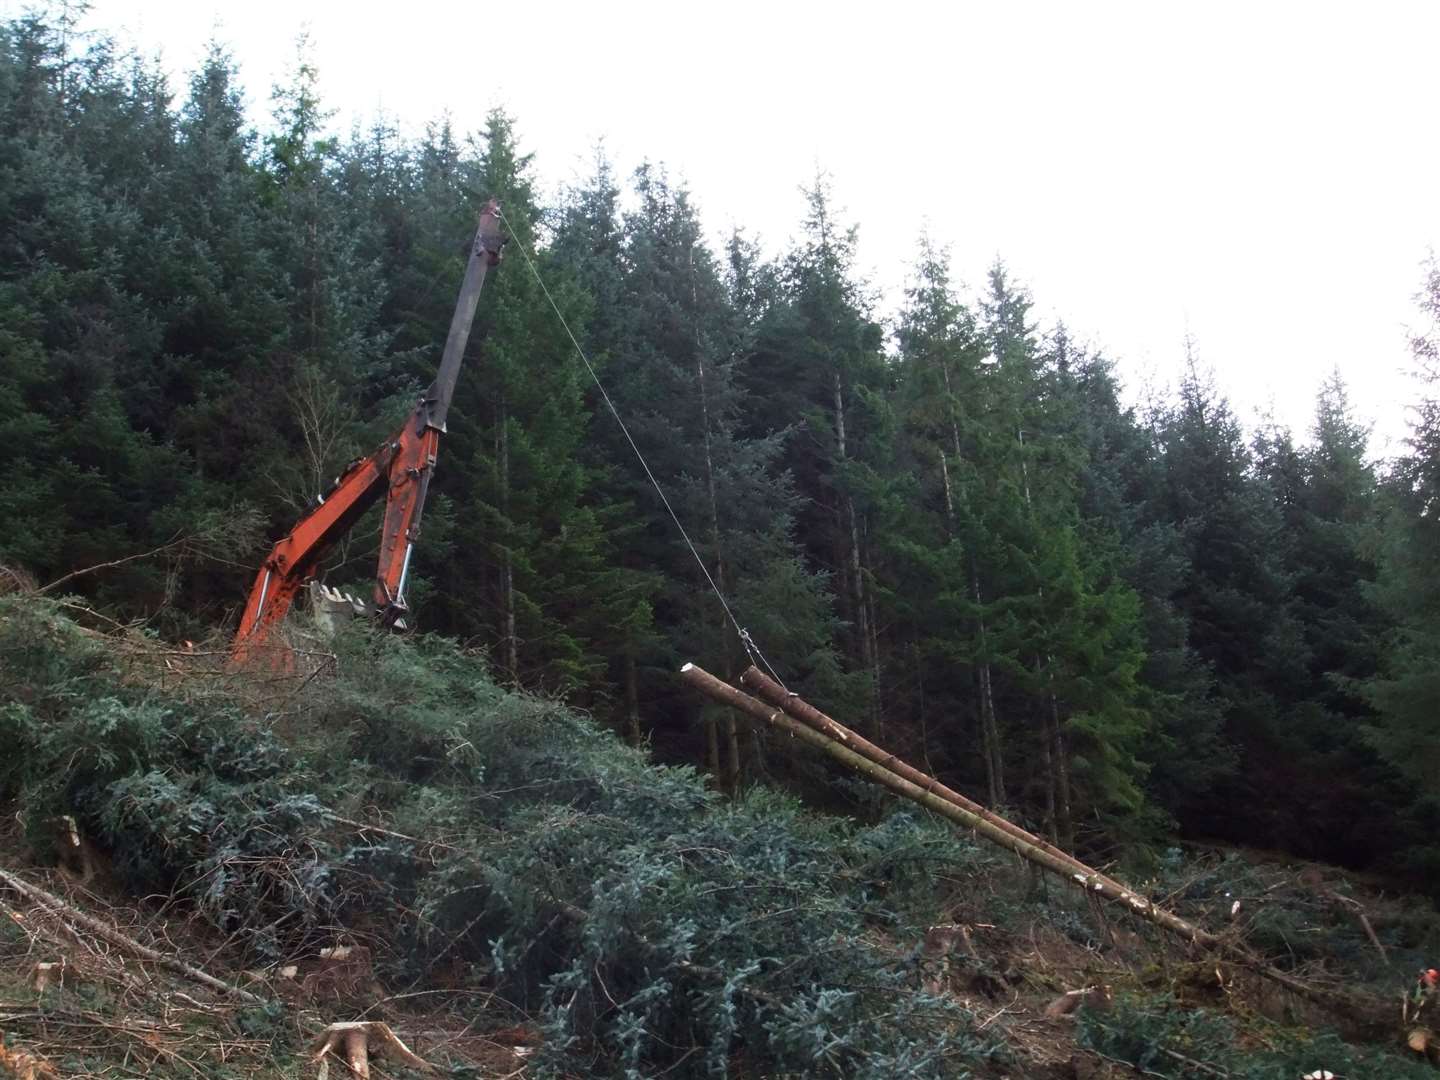 A skyline winch being used to extract timber at Glen Righ.